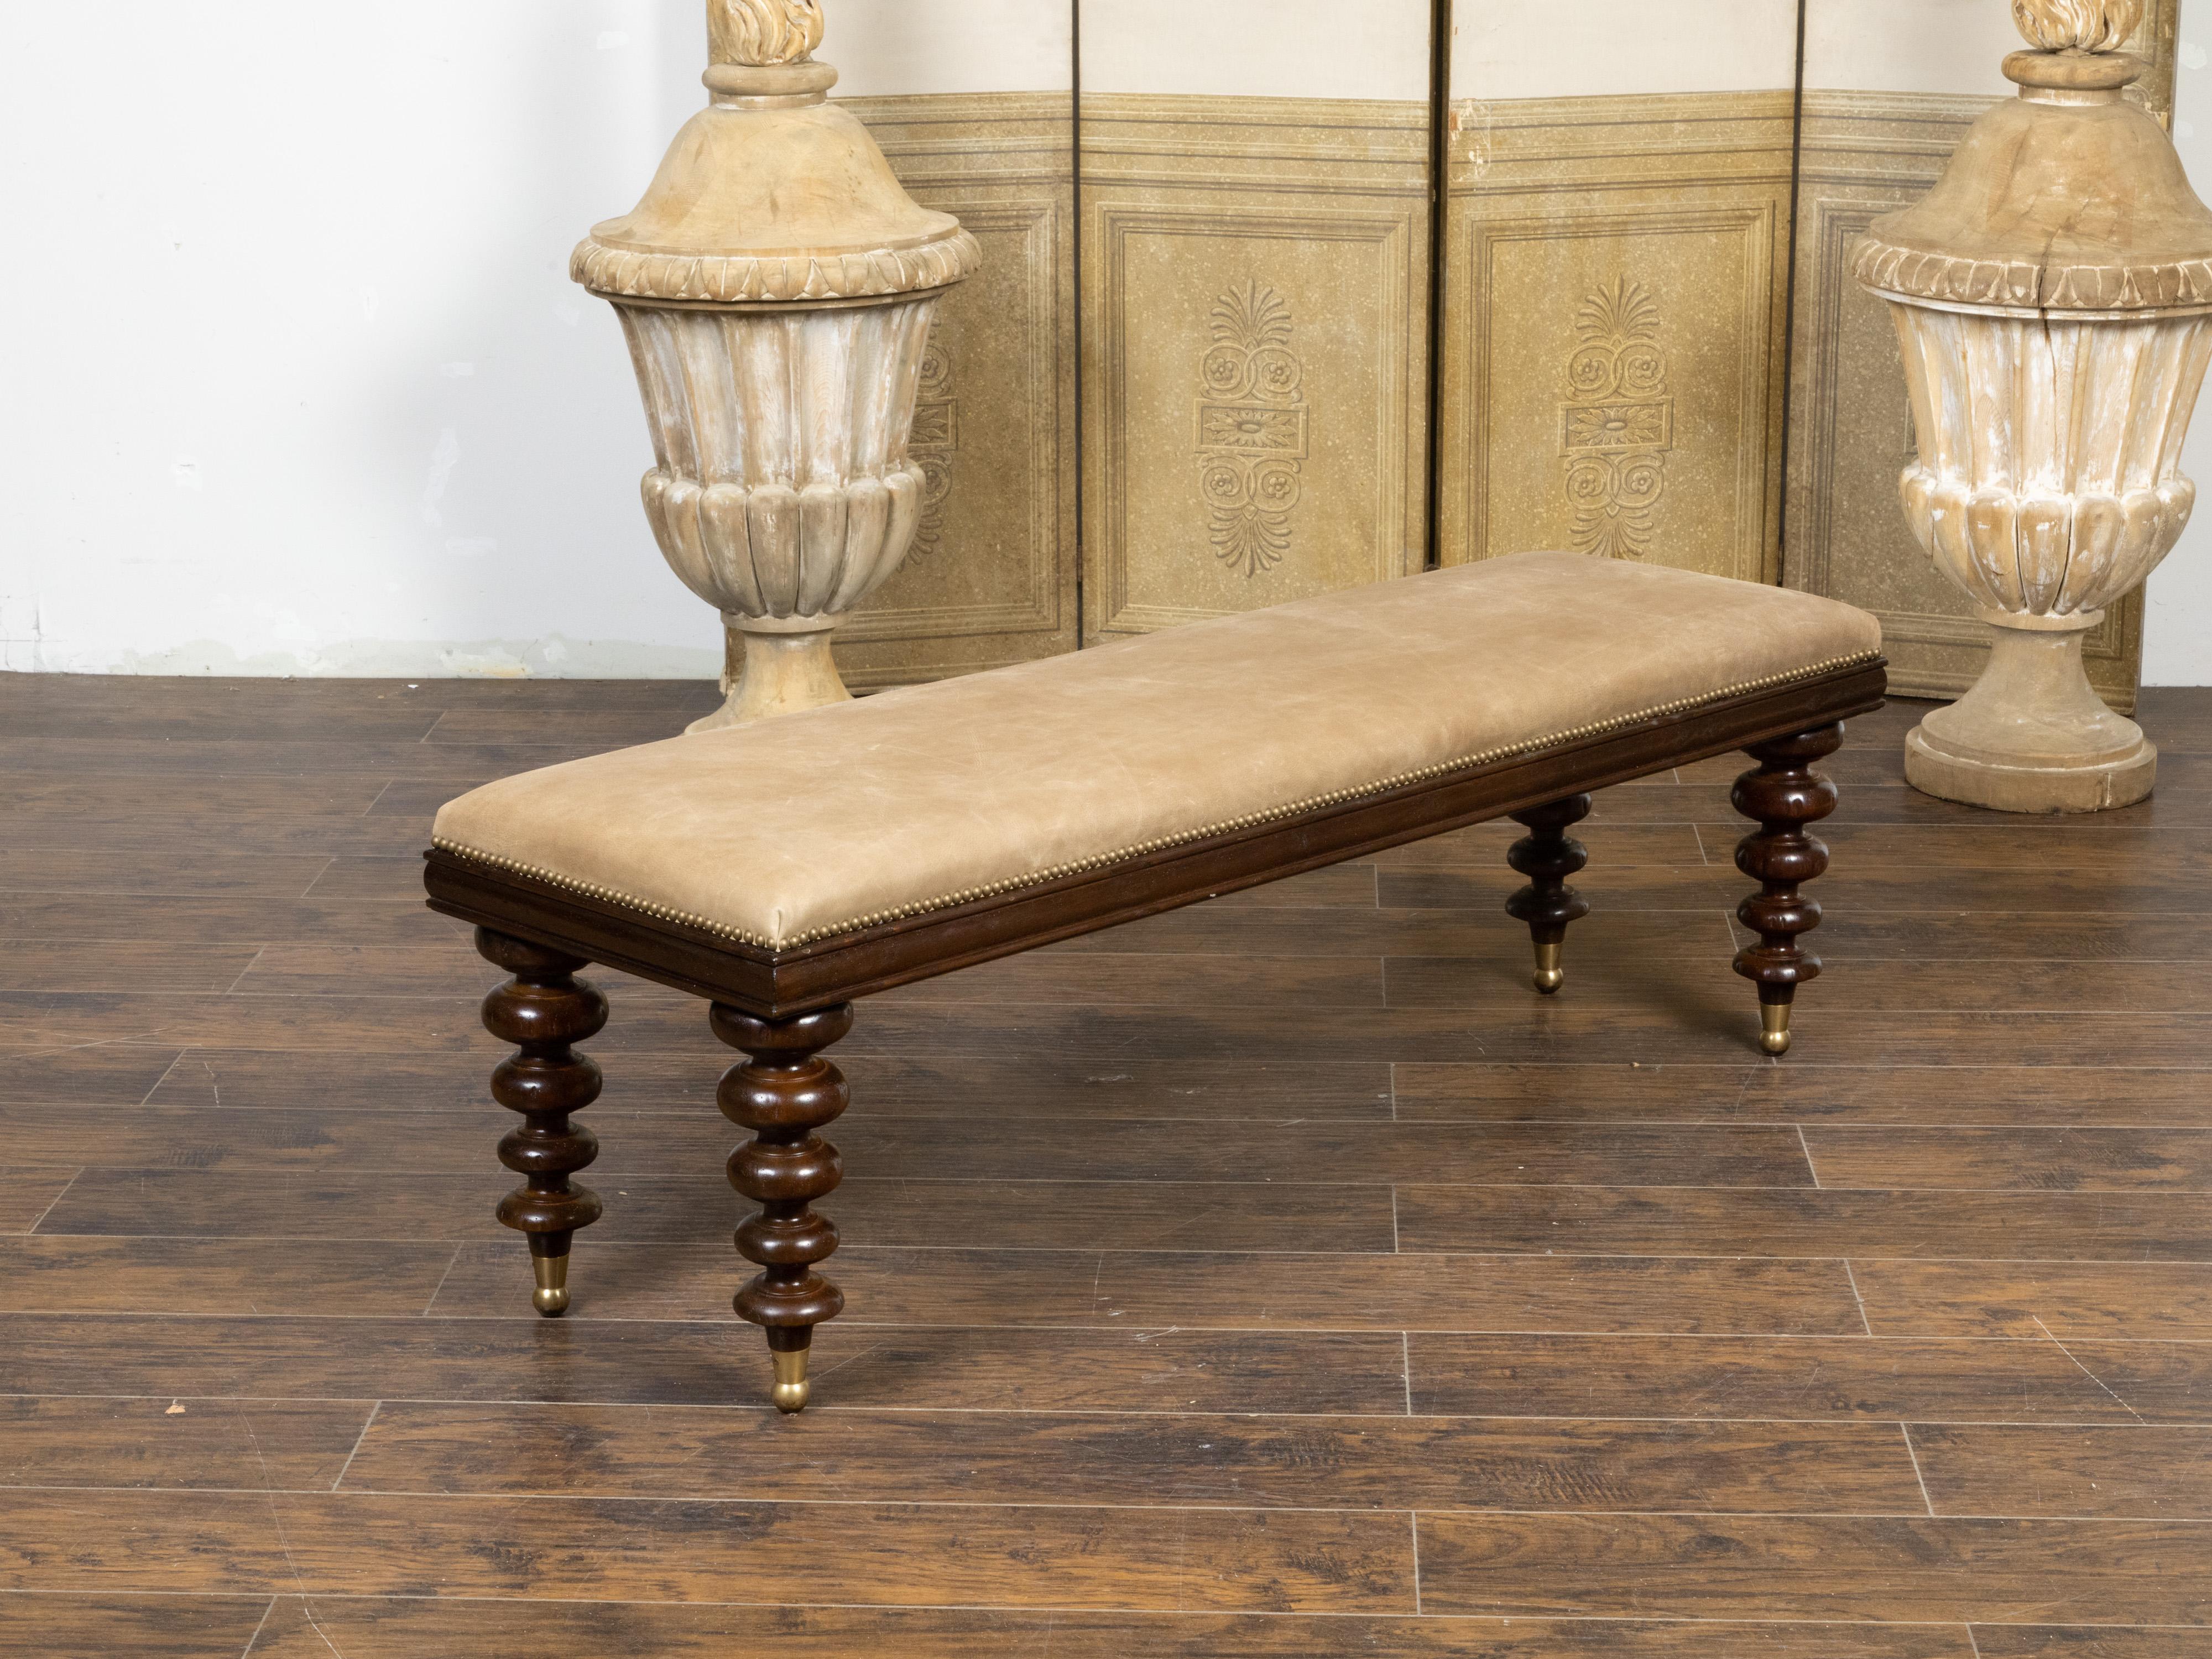 An English oak bench from the 19th century, with spool turned legs, leather upholstery, nailhead trim and brass feet. Created in England during the 19th century, this oak bench features a rectangular seat covered with a camel color leather fabric